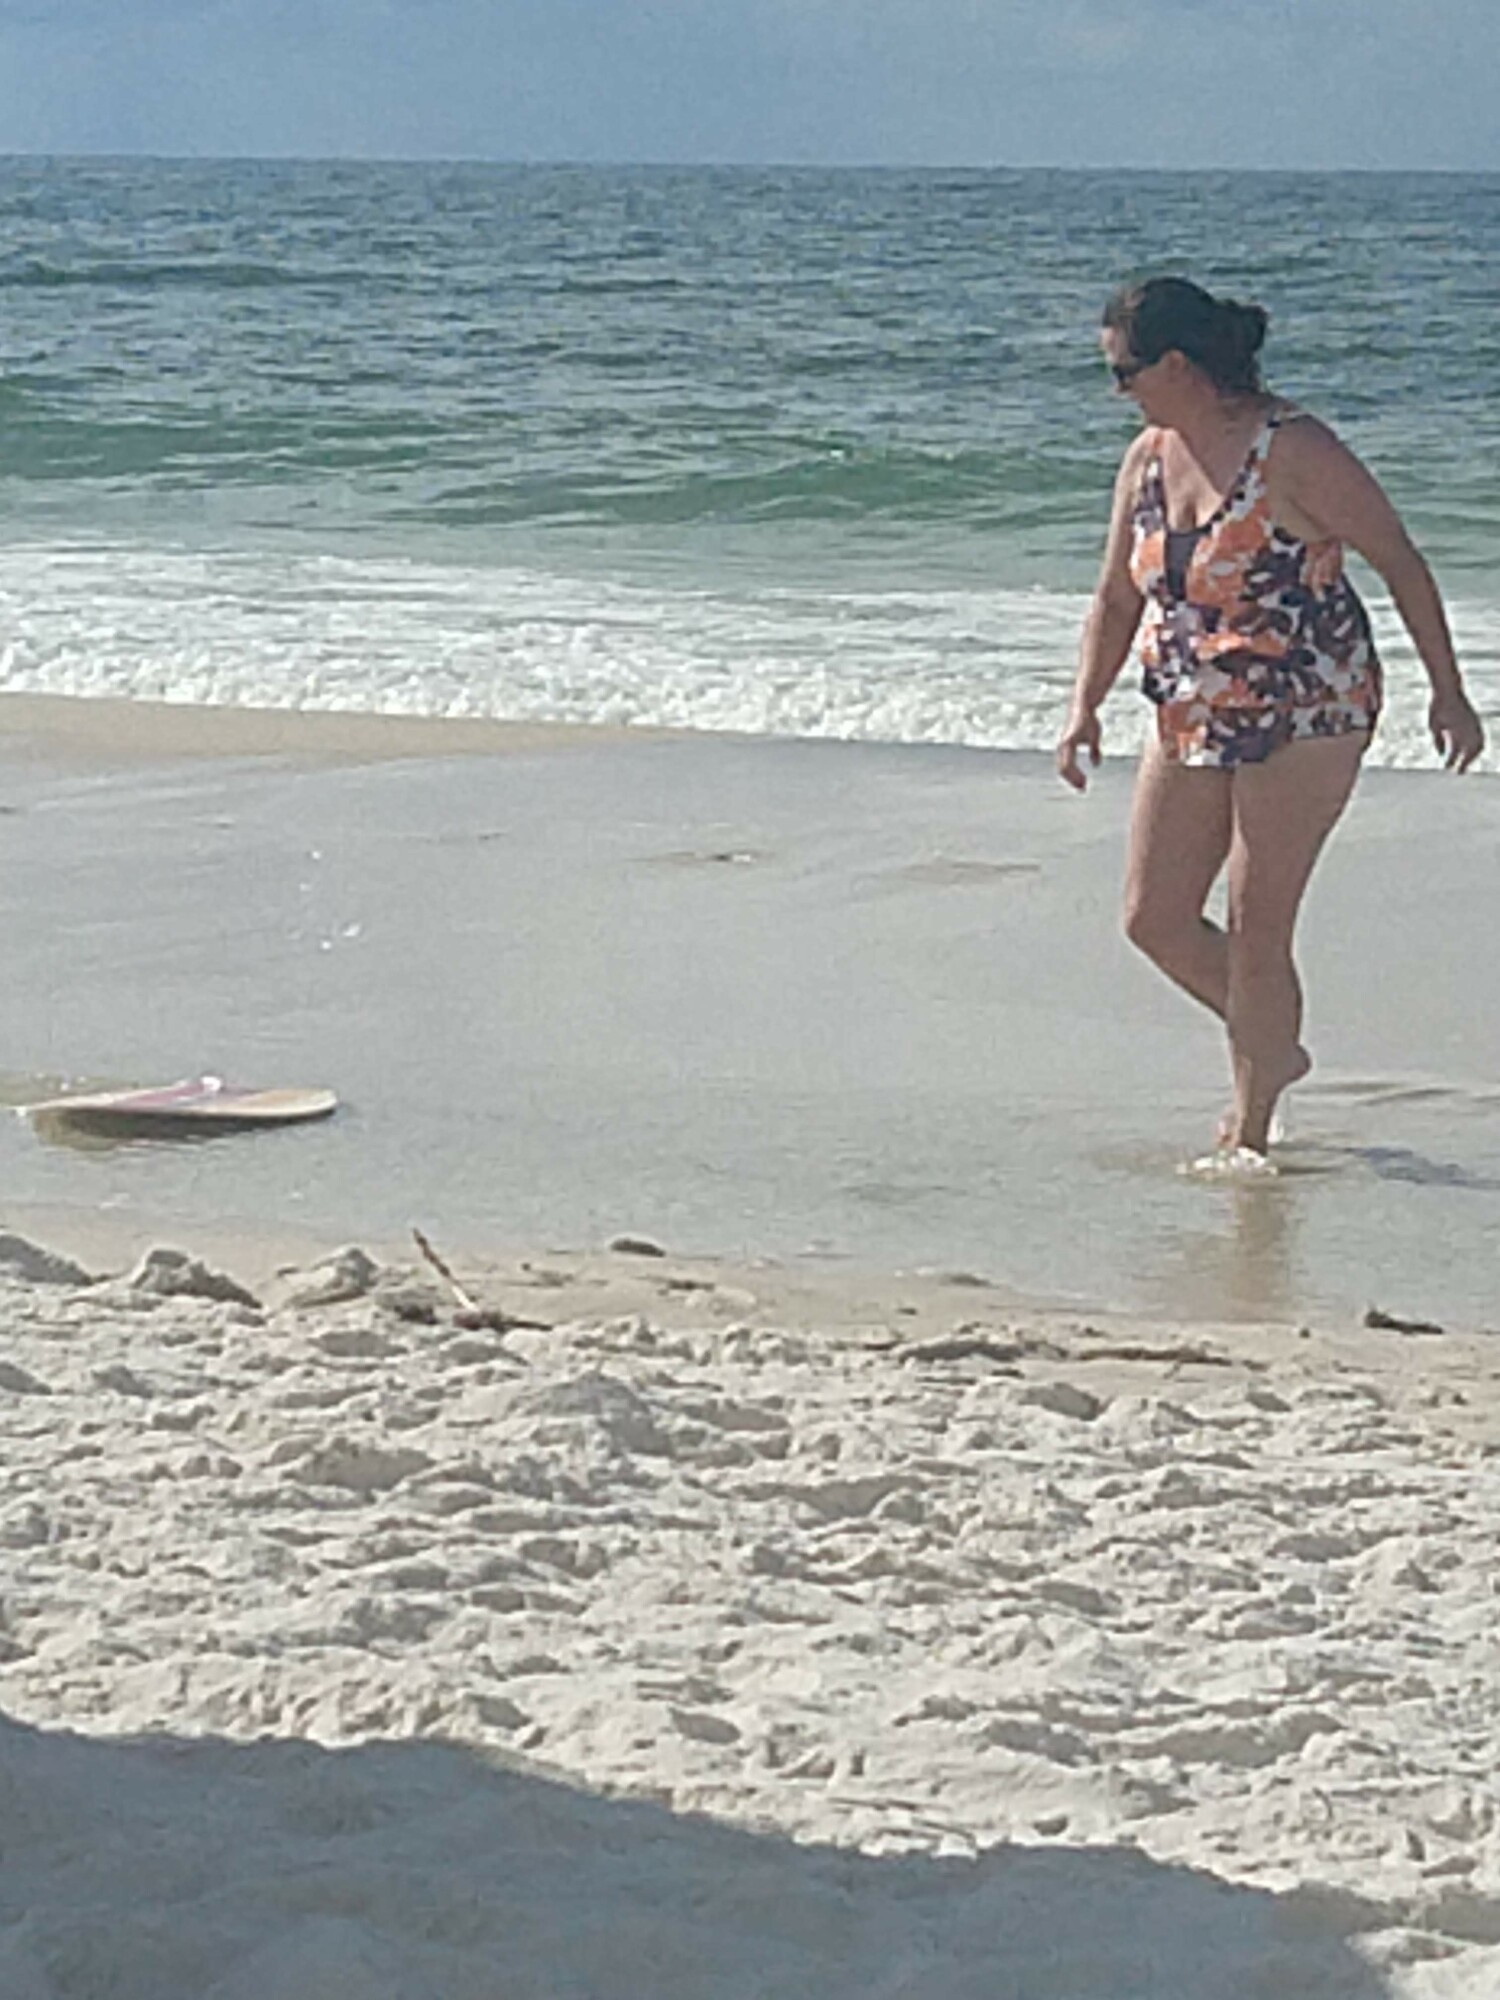 Me trying to stand surf on a boogie board